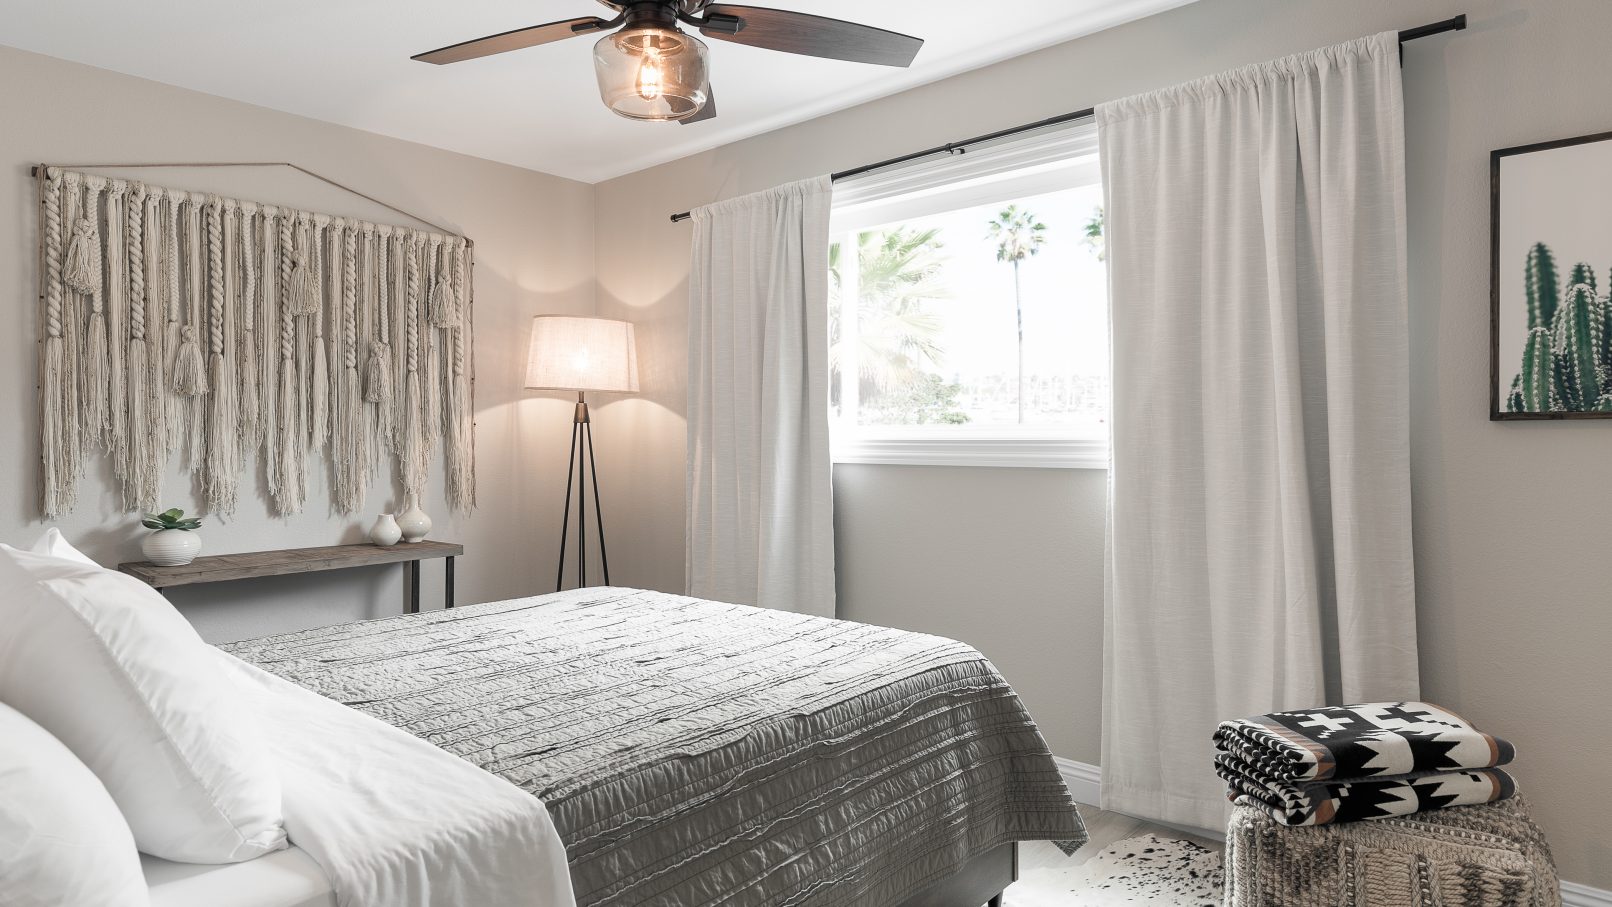 Orange County Interior Design Photography in Huntington Beach California featuring a bedroom in muted beige tones with macrame on the wall and delicate linens and lighting features throughout